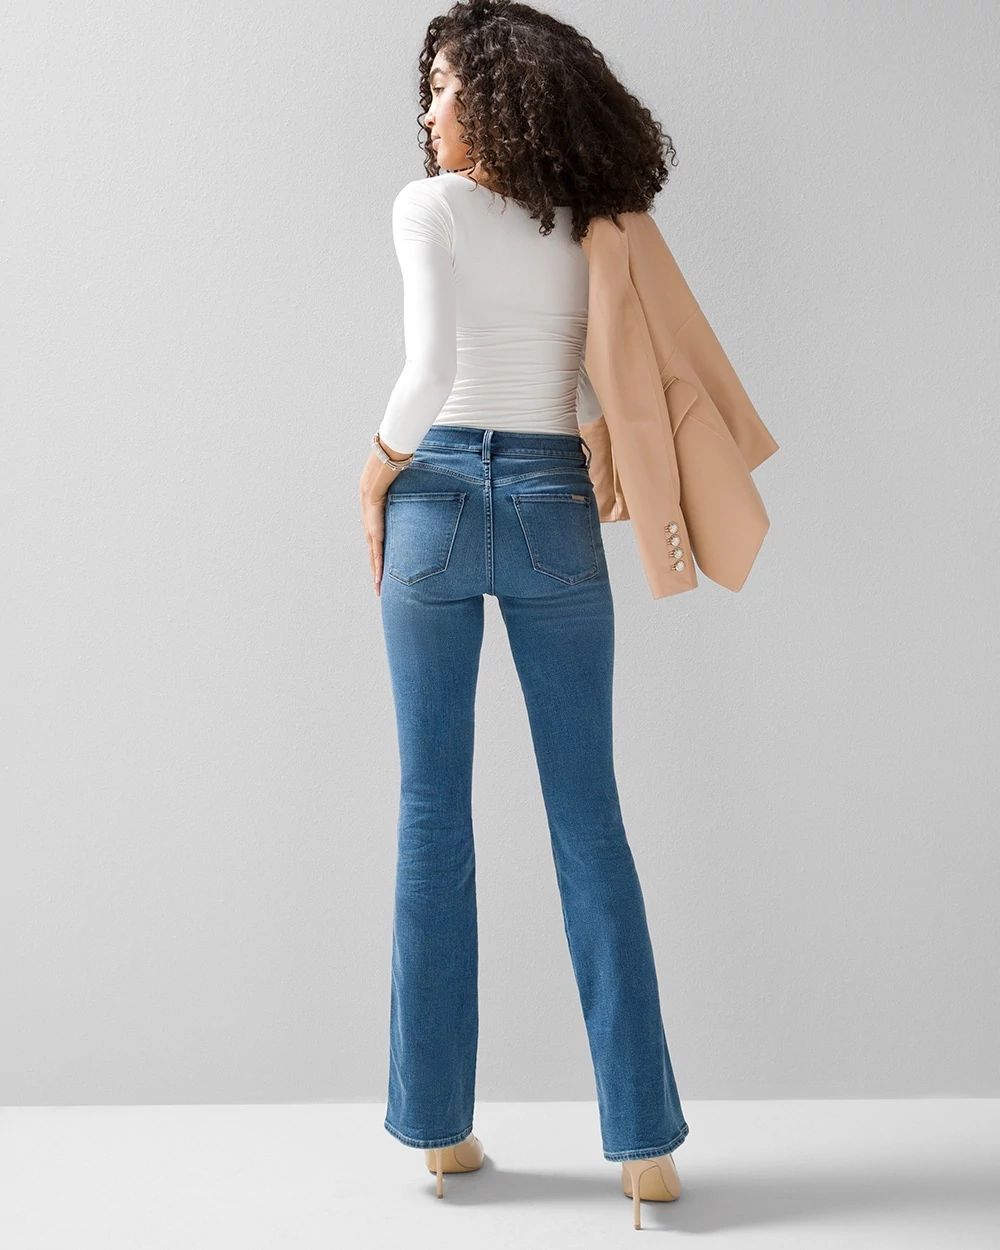 Petite High-Rise Everyday Soft Denim  Skinny Flare Jeans click to view larger image.